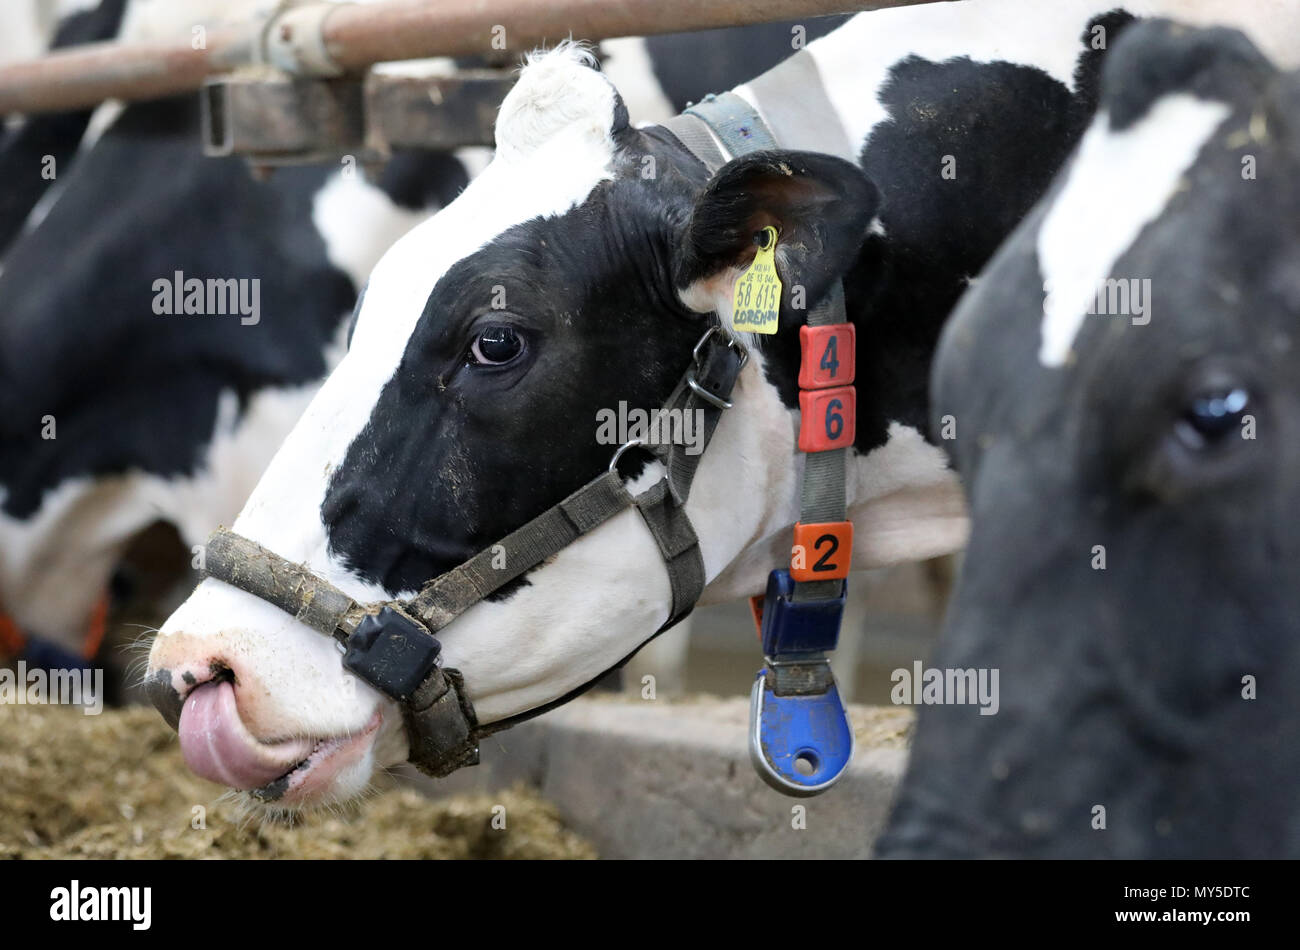 04 June 2018, Germany, Dummerstorf: A dairy cow with a collar and a  transponder (blue) is in a barn at Dummerstorf estate. Amongst others, the  transponders measure the movement and activity of